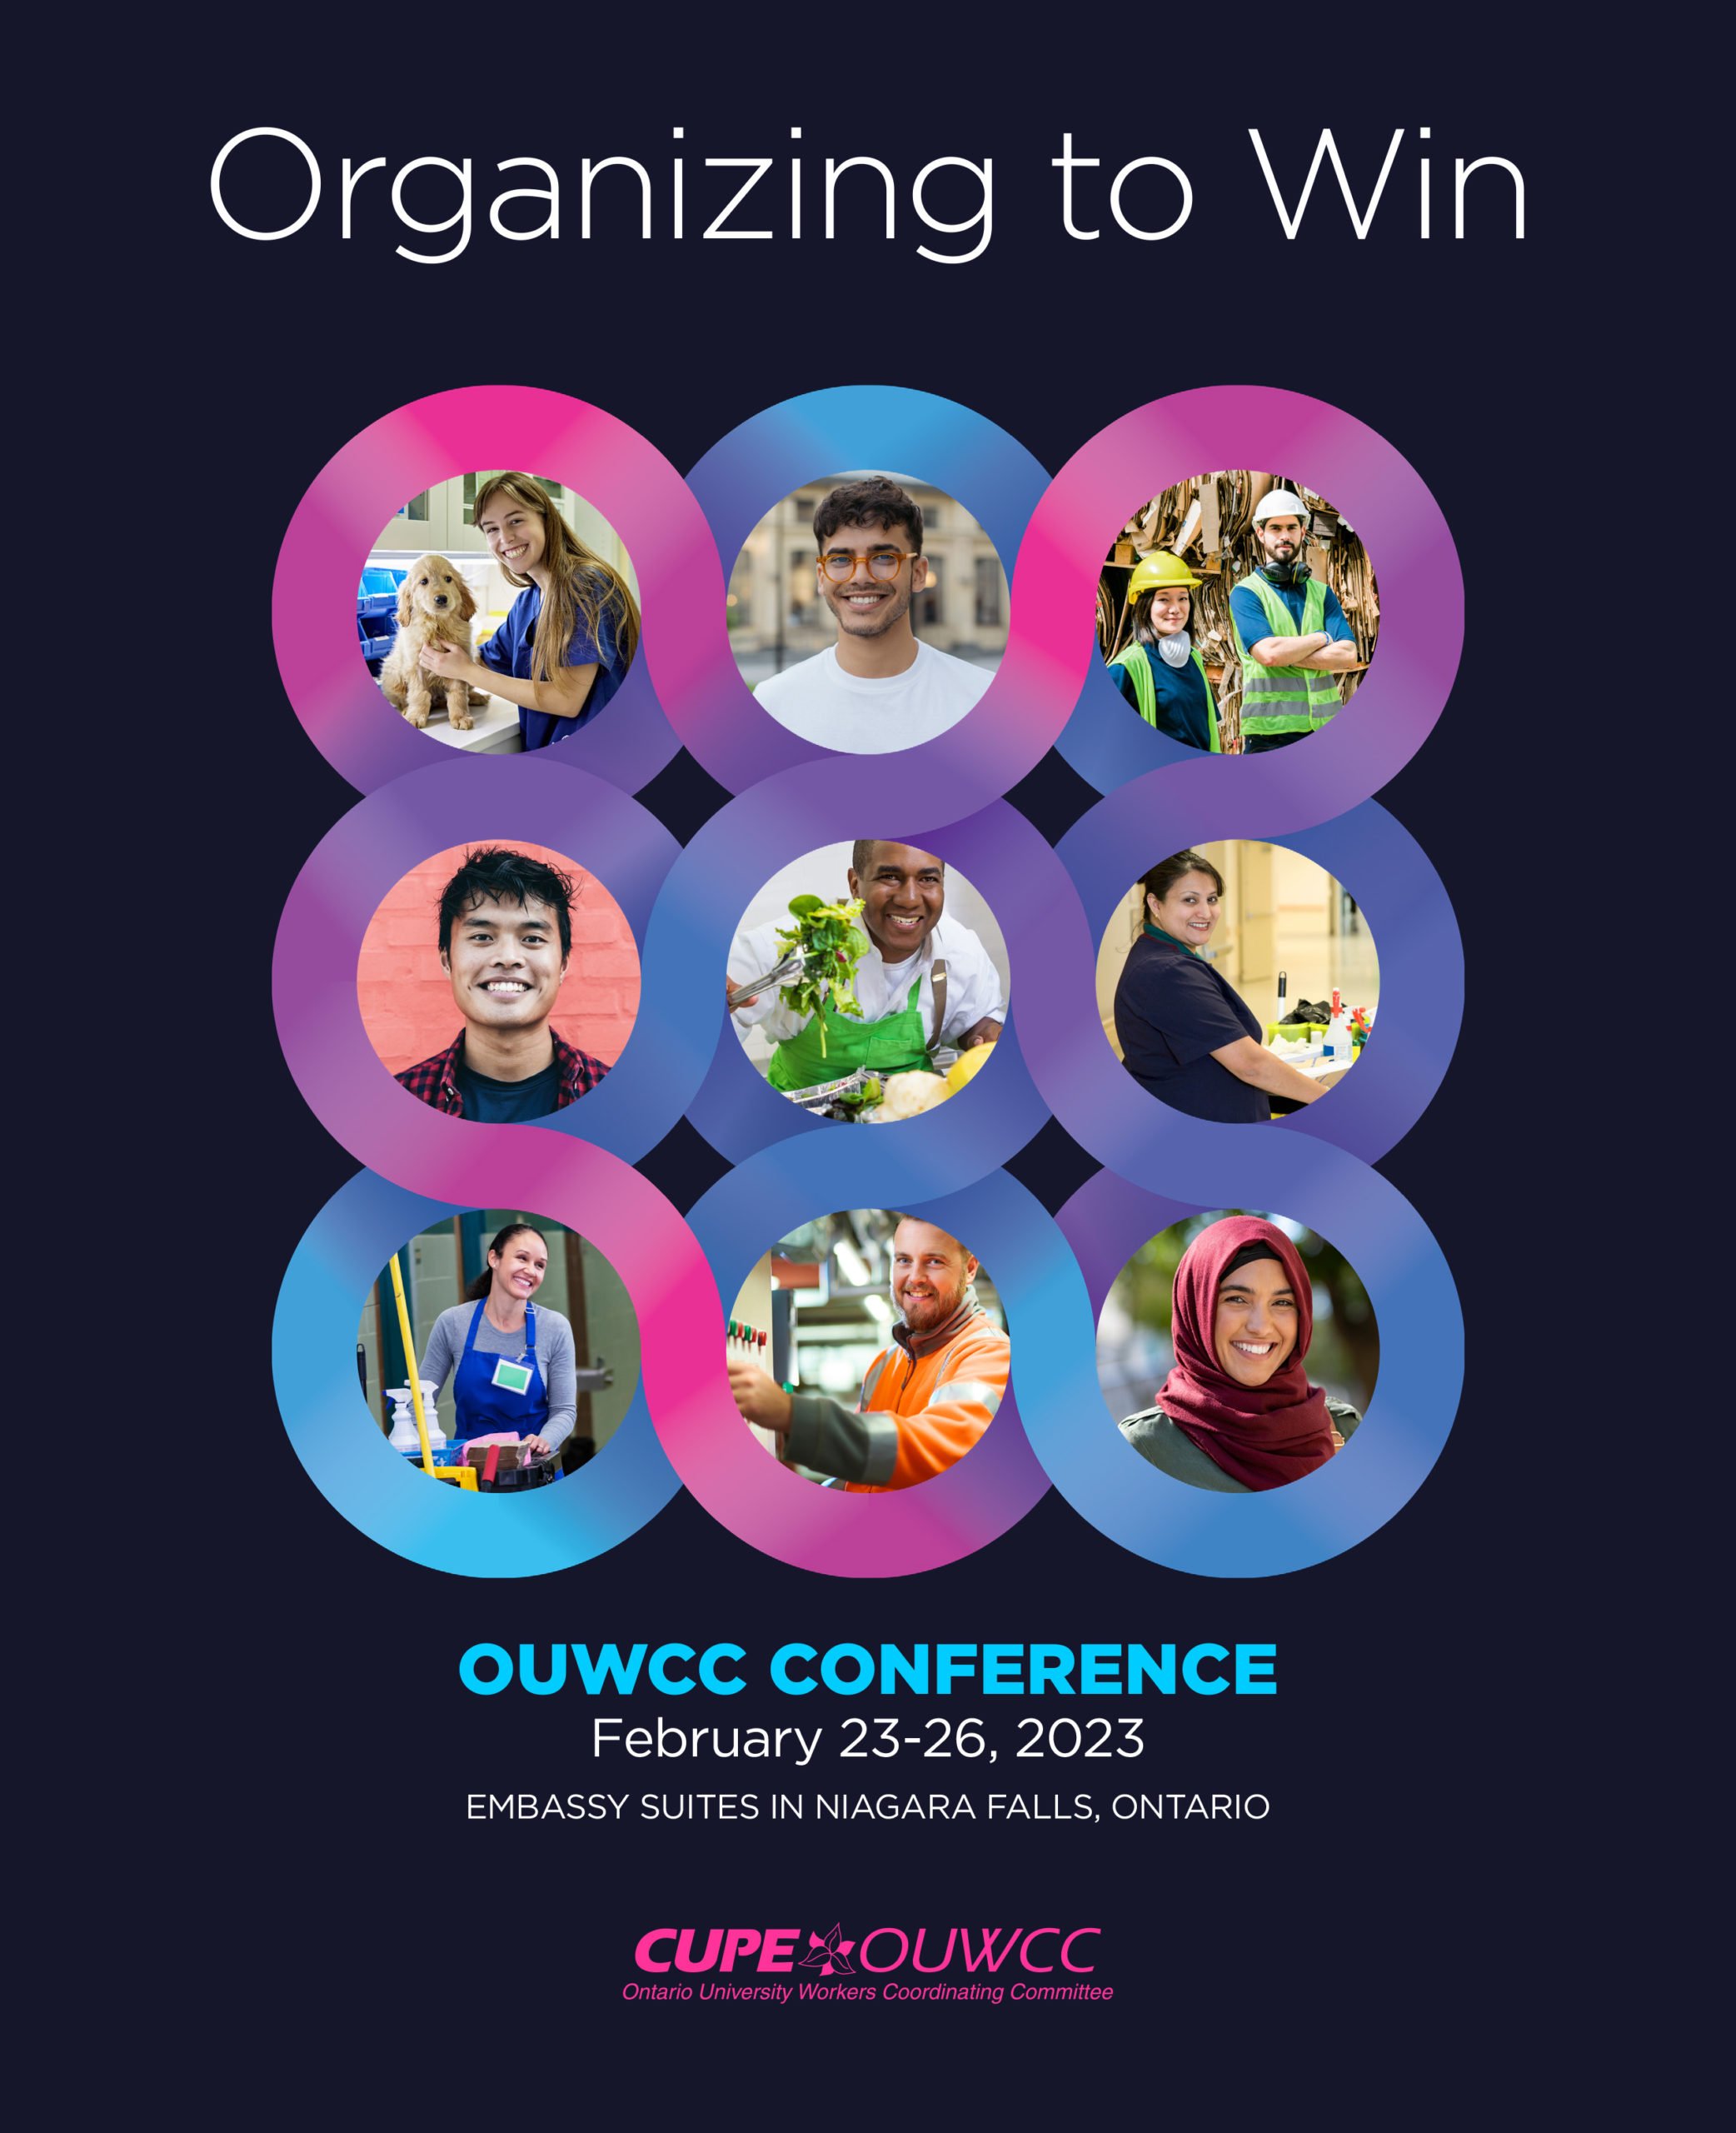 OUWCC_Conference Cover_2023_ENG_Final